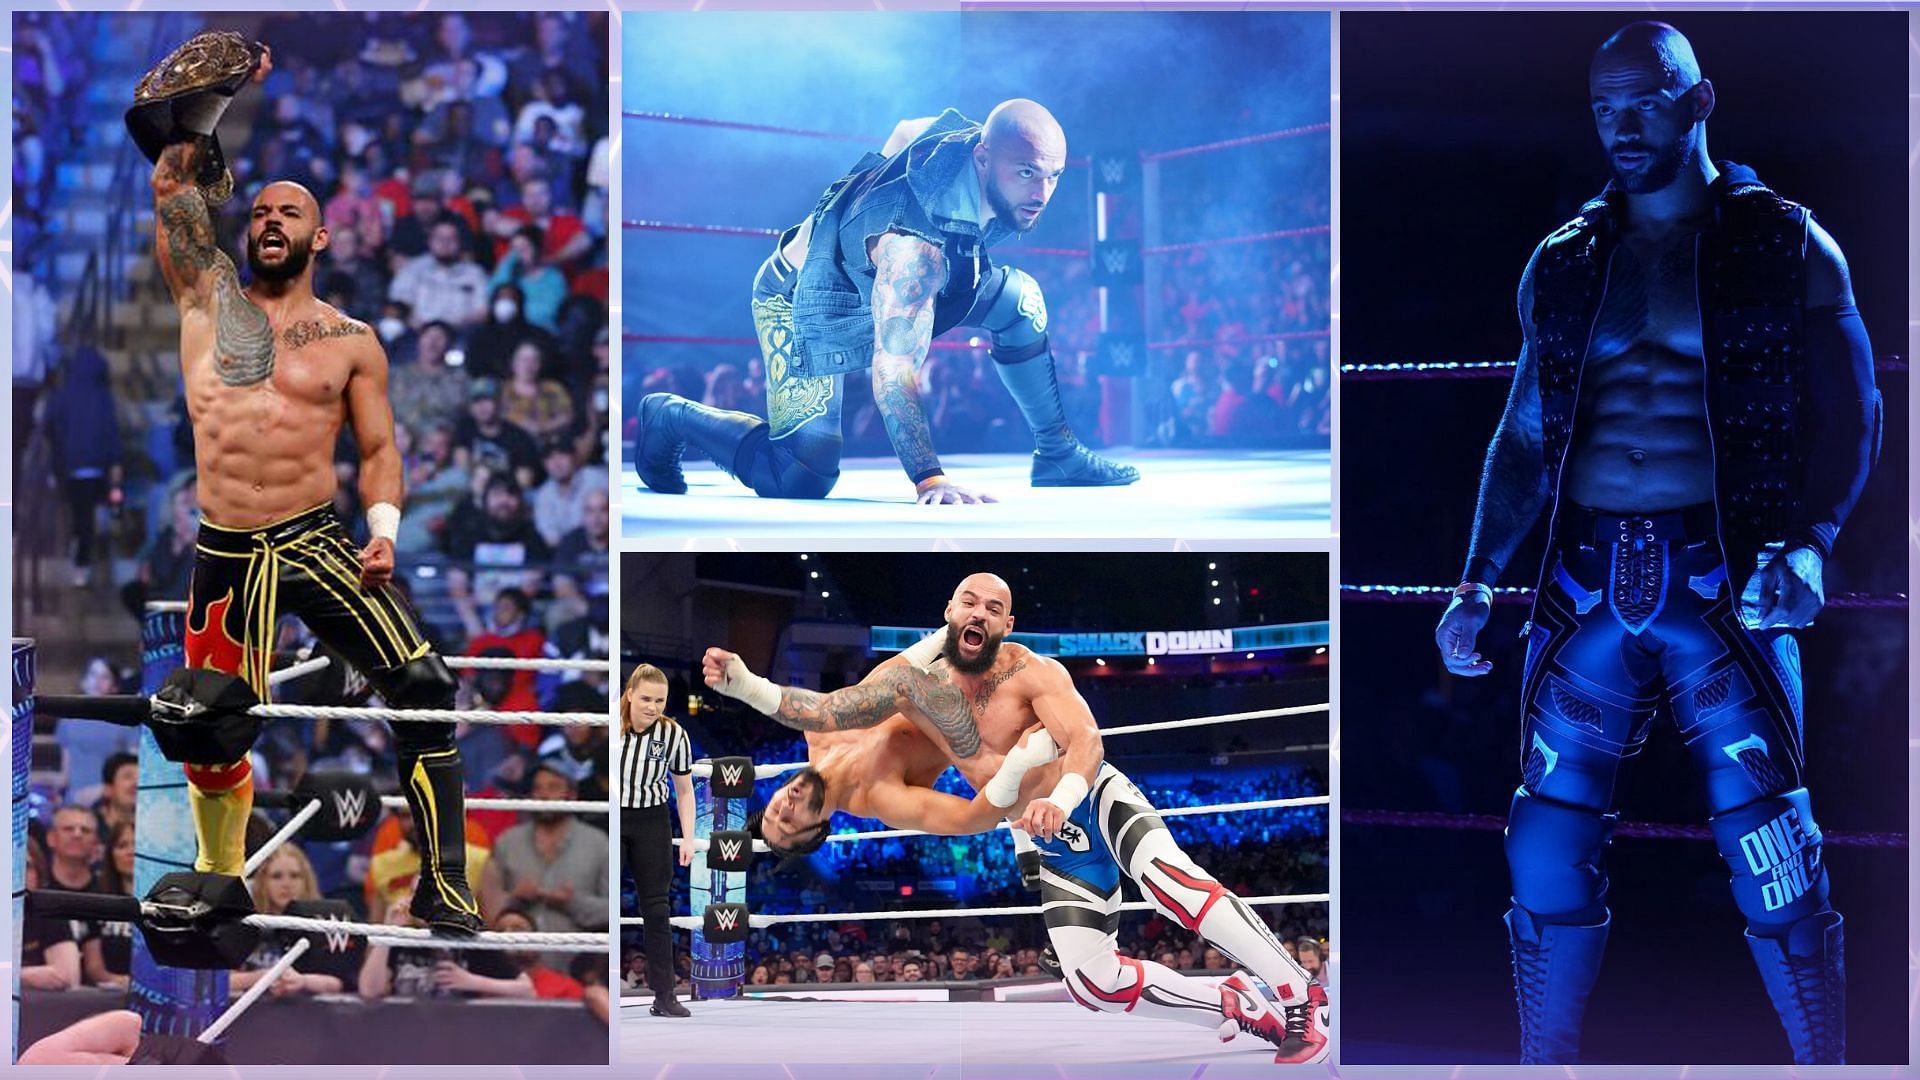 Ricochet is the winner of SmackDown World Cup.